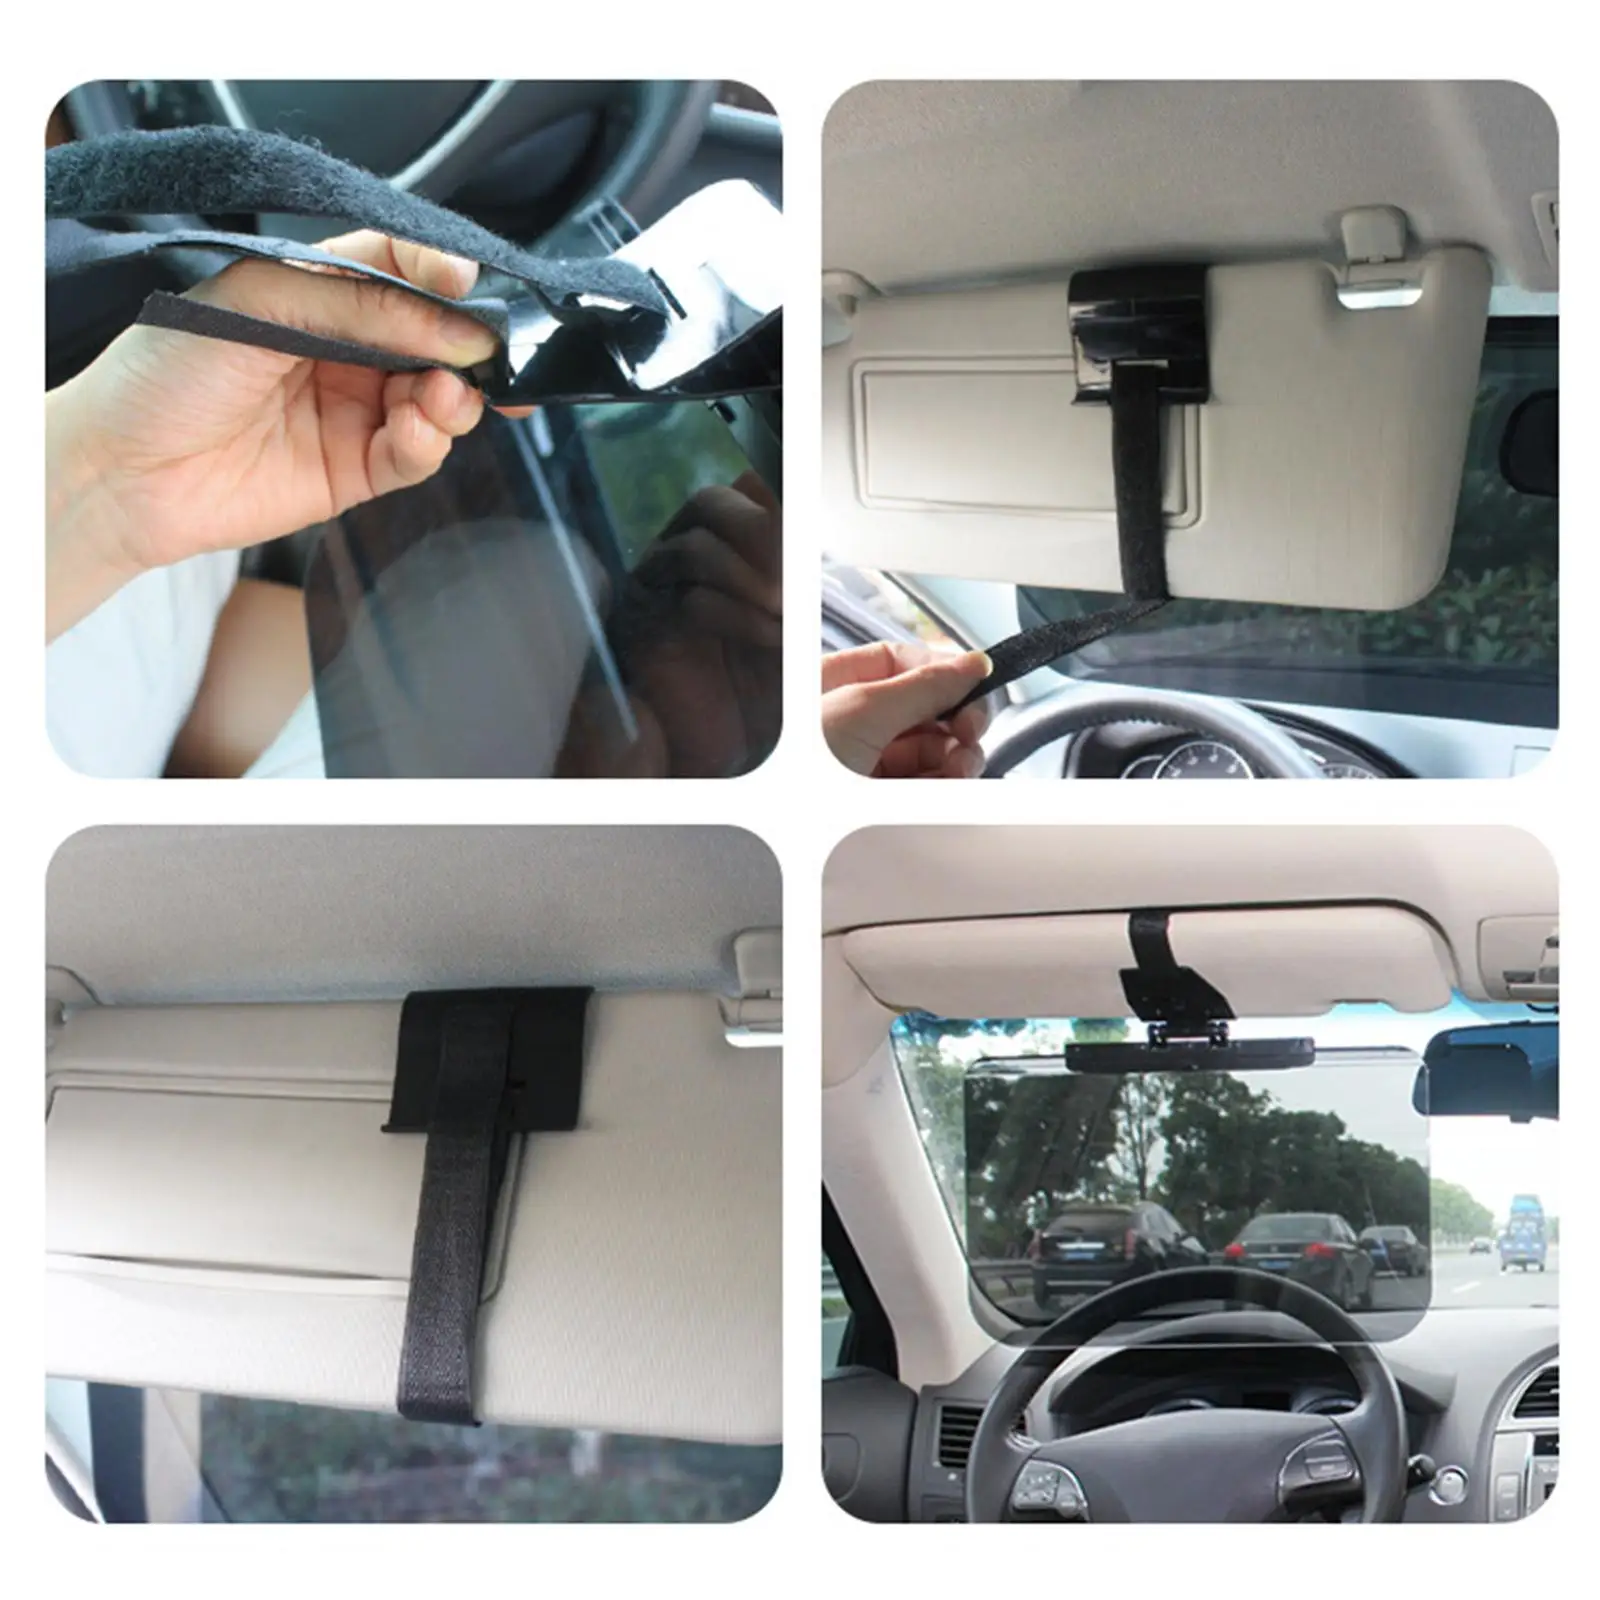 Car Anti Glare Sun Visor Extension Sunshade Adjustable for Car Windshield Protects from Glare, Snow Blindness Universal Durable